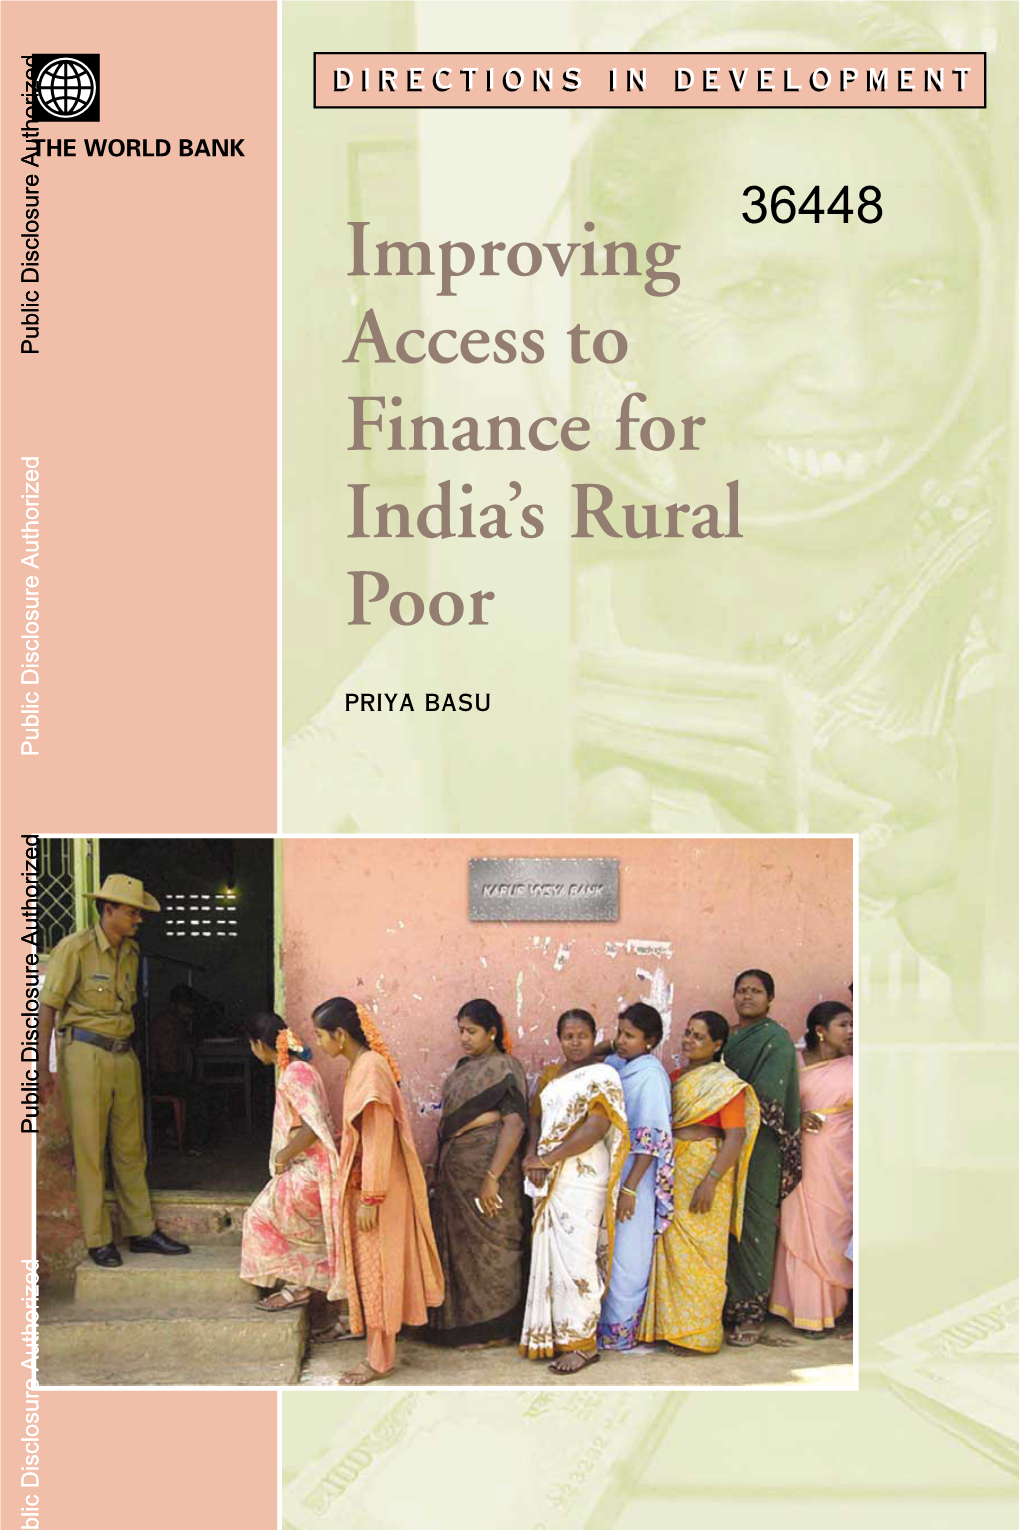 Improving Access to Finance for India's Rural Poor